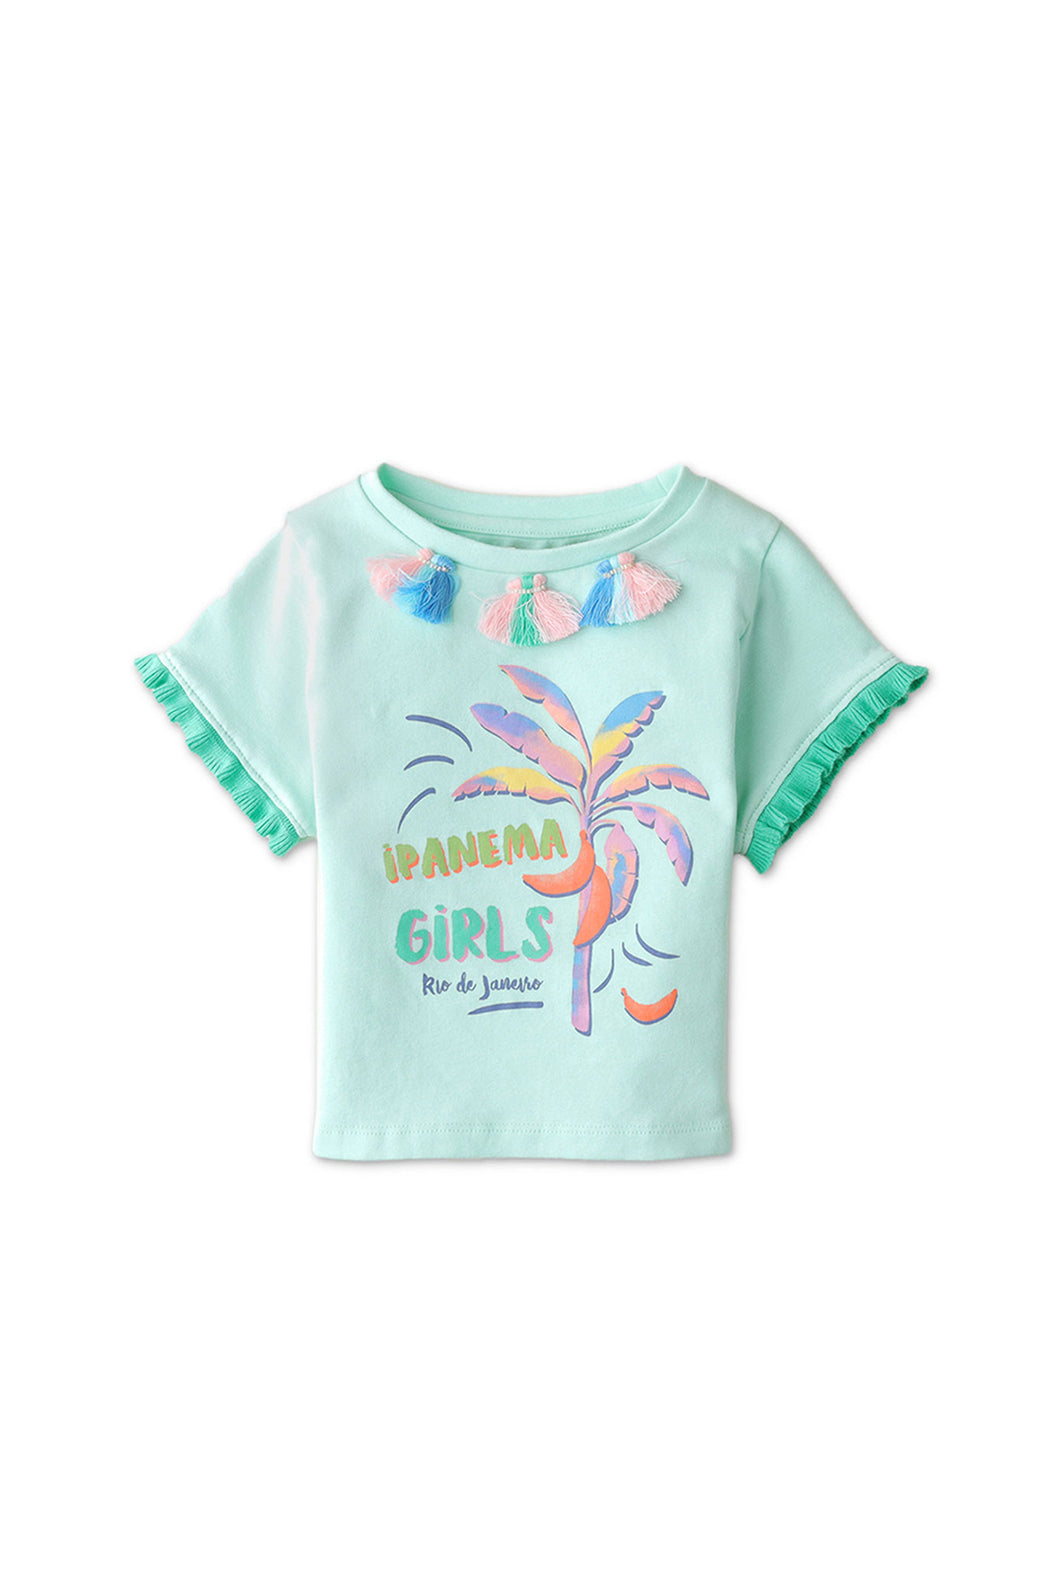 Gingersnaps Ipanema Print Tee W/ Neck Embellisment and Trim On Sleeves